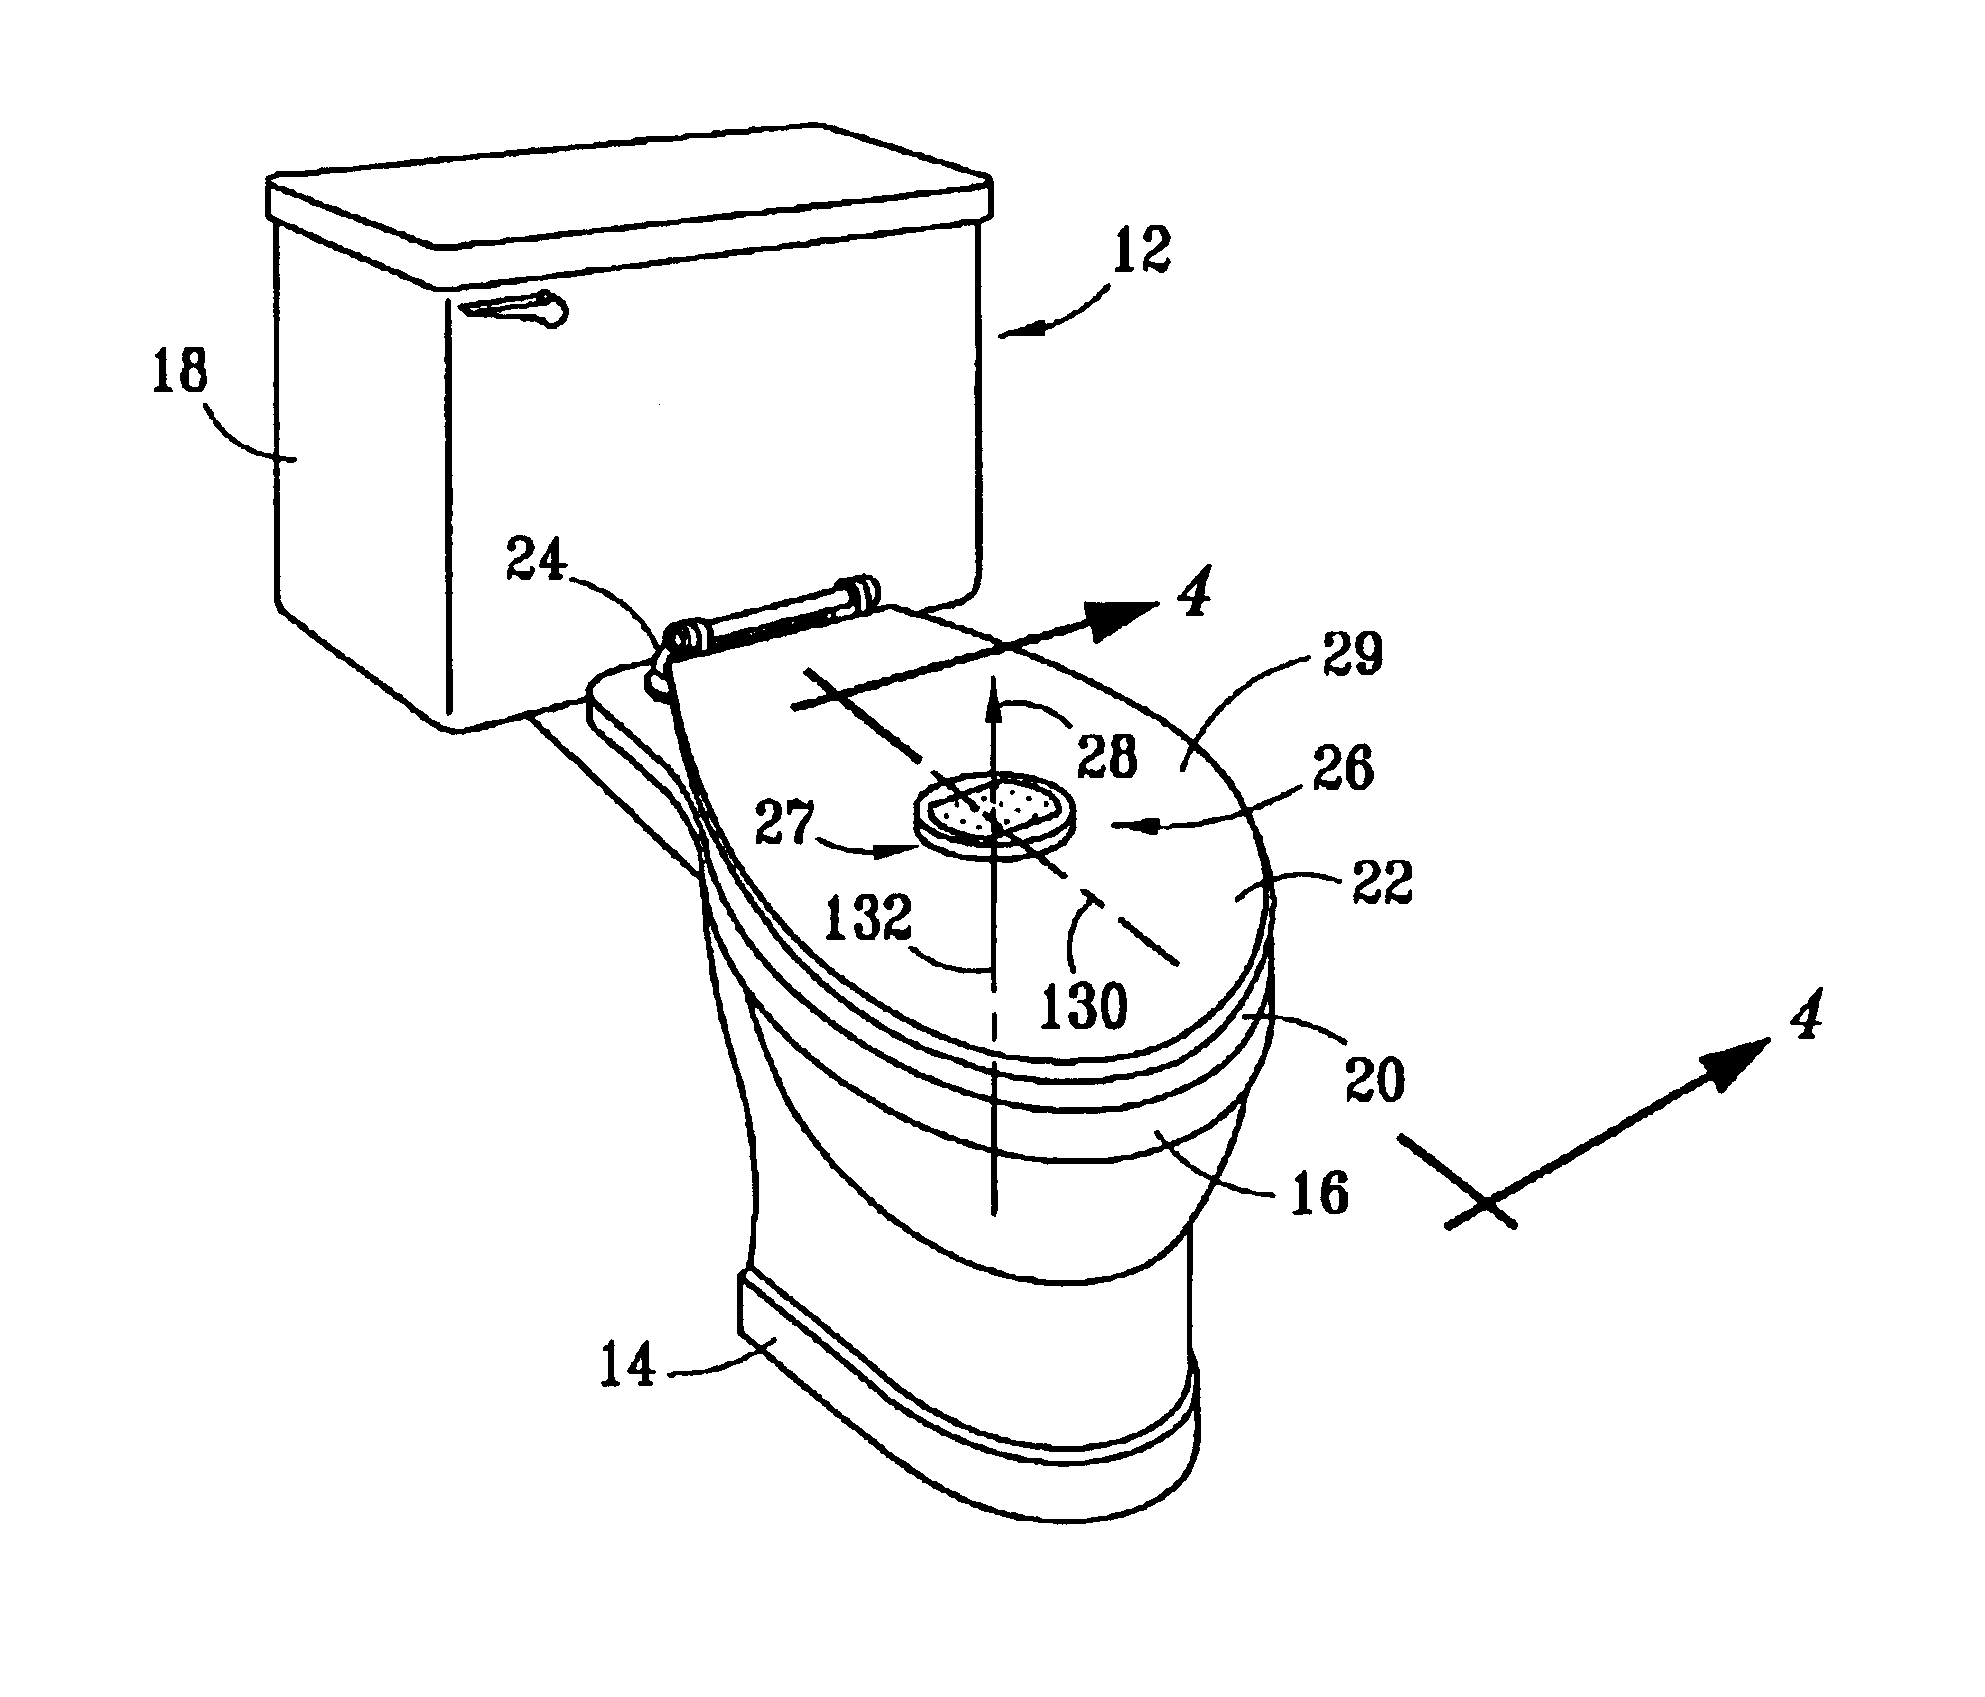 Self-contained exhaust fan for a water closet